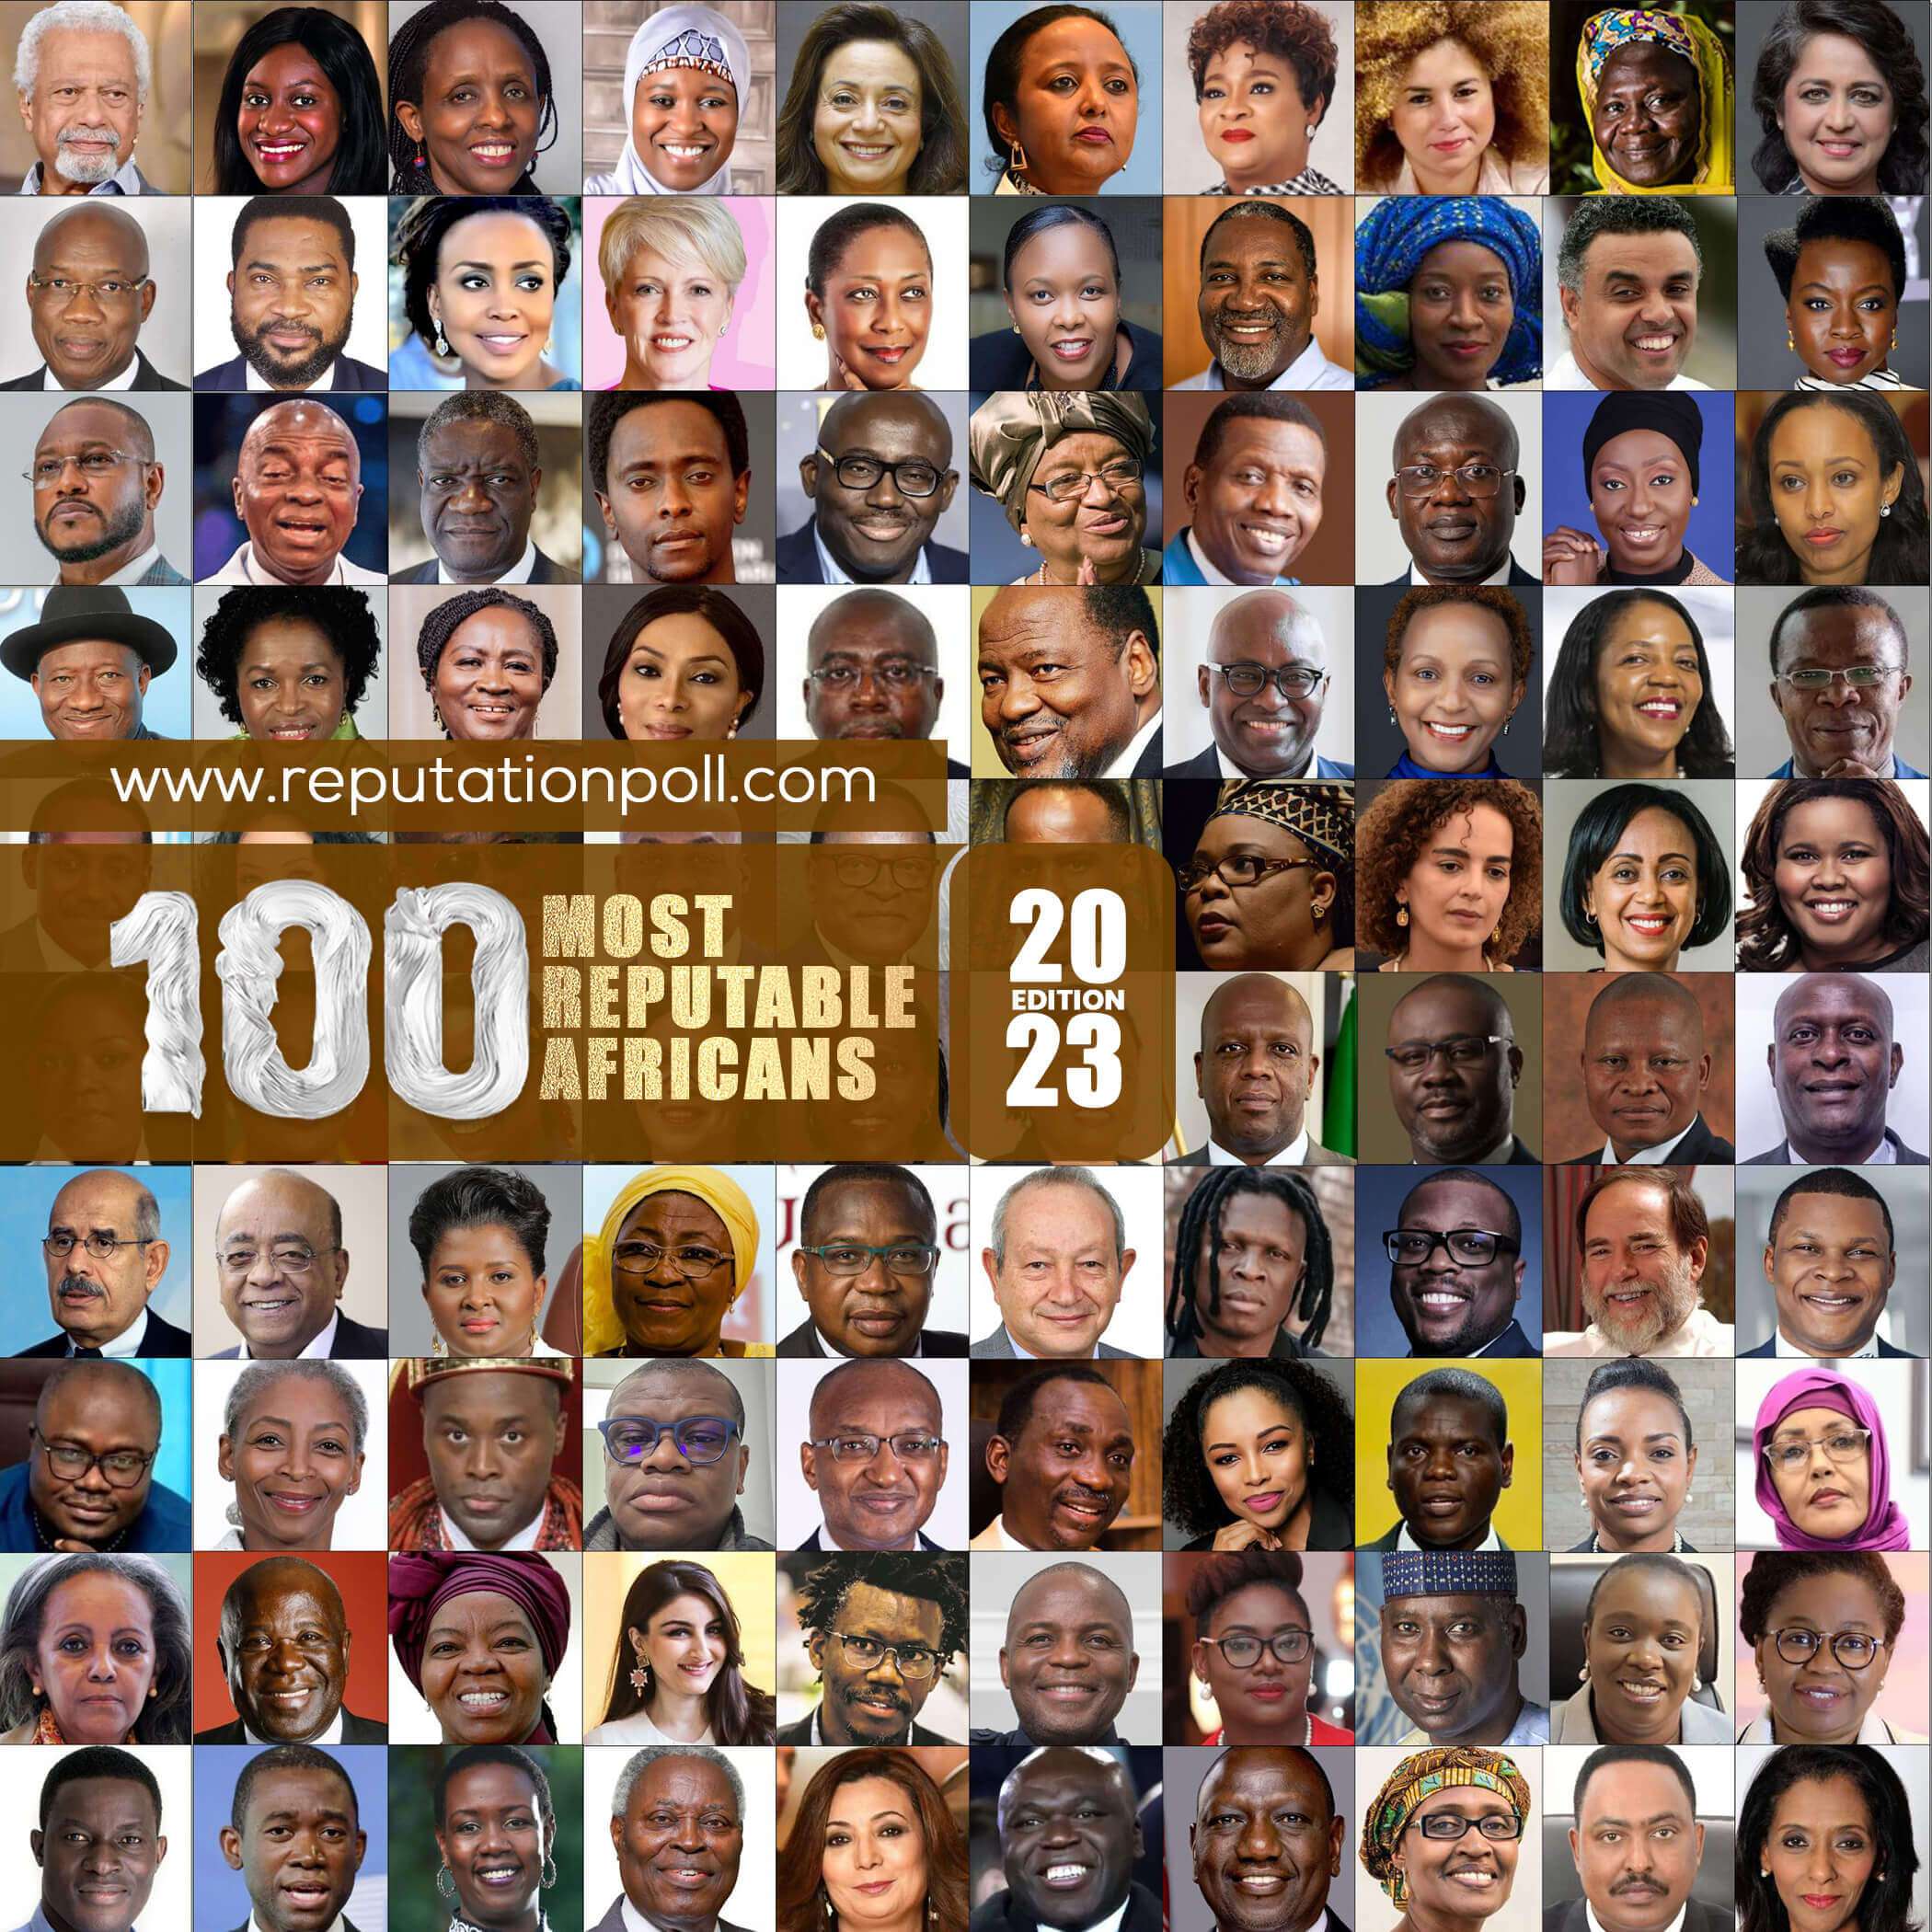 Prof. Naana Opoku-Agyemang, Lucy Quist, Theresa Ayoade among 100 Most Reputable Africans for 2023